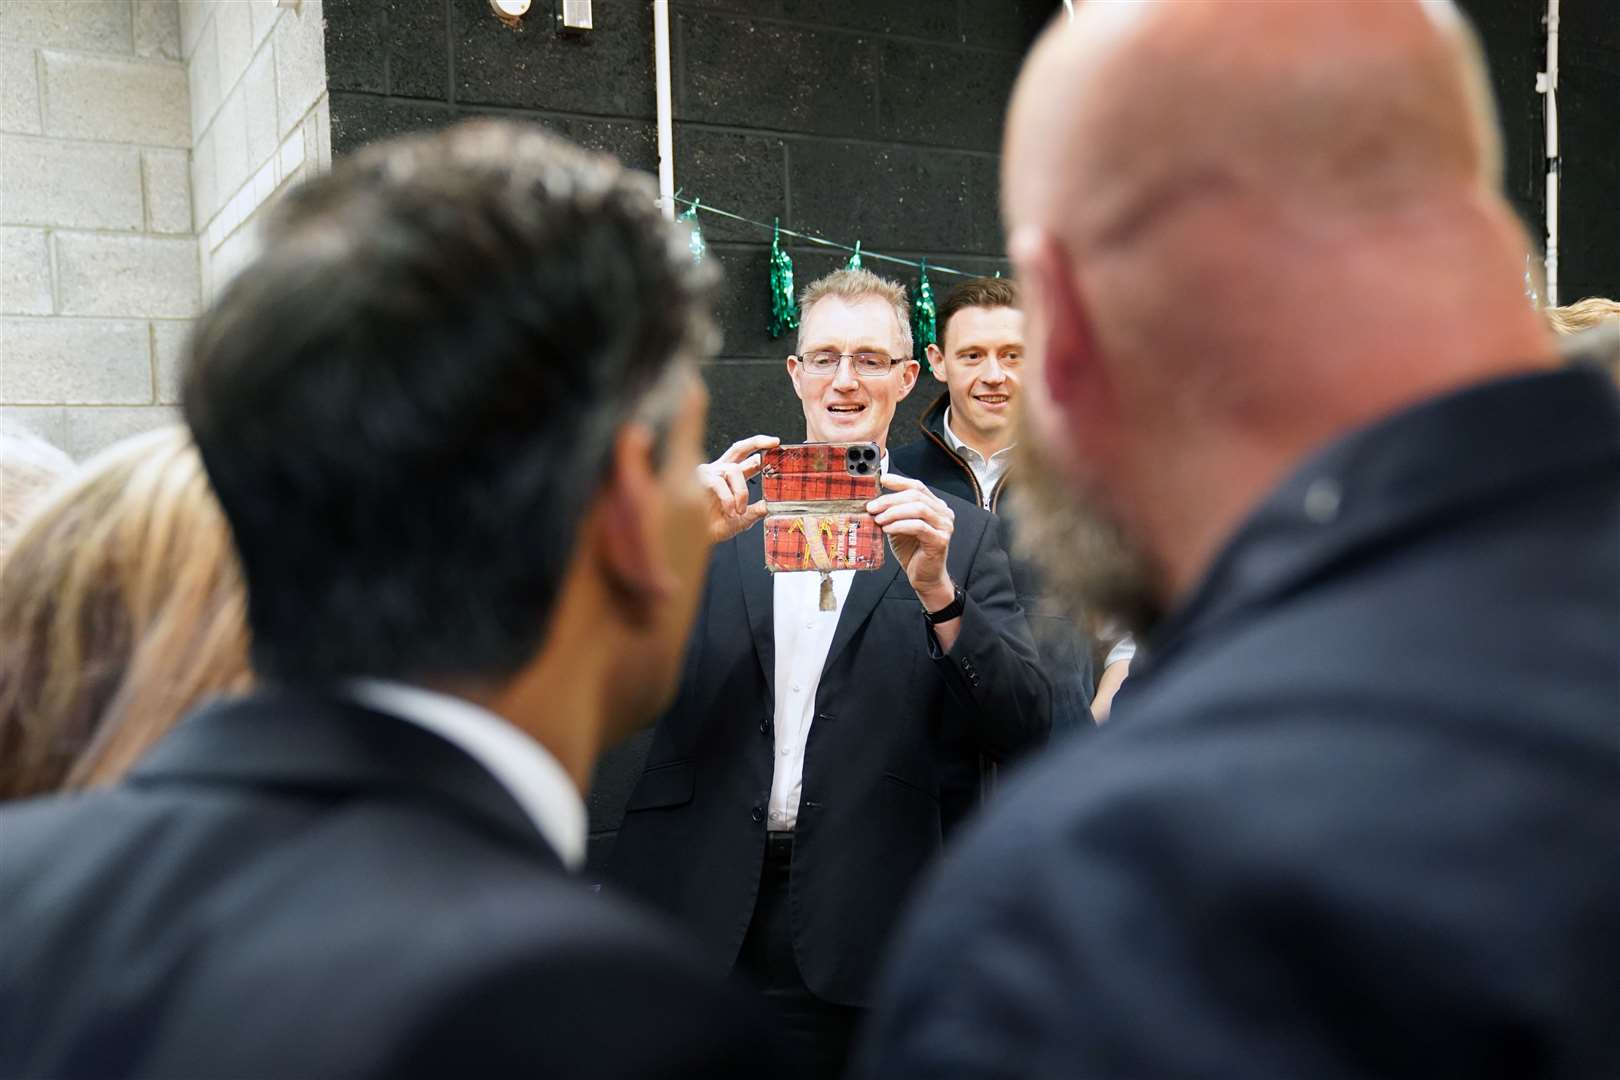 Welsh Secretary David TC Davies takes a photo of Rishi Sunak at the Vale of Glamorgan Brewery, in Barry, where the teetotal Prime Minister made a gaffe by asking if the football this summer would boost sales, despite Wales not qualifying for the Euro 2024 tournament (Stefan Rousseau/PA)